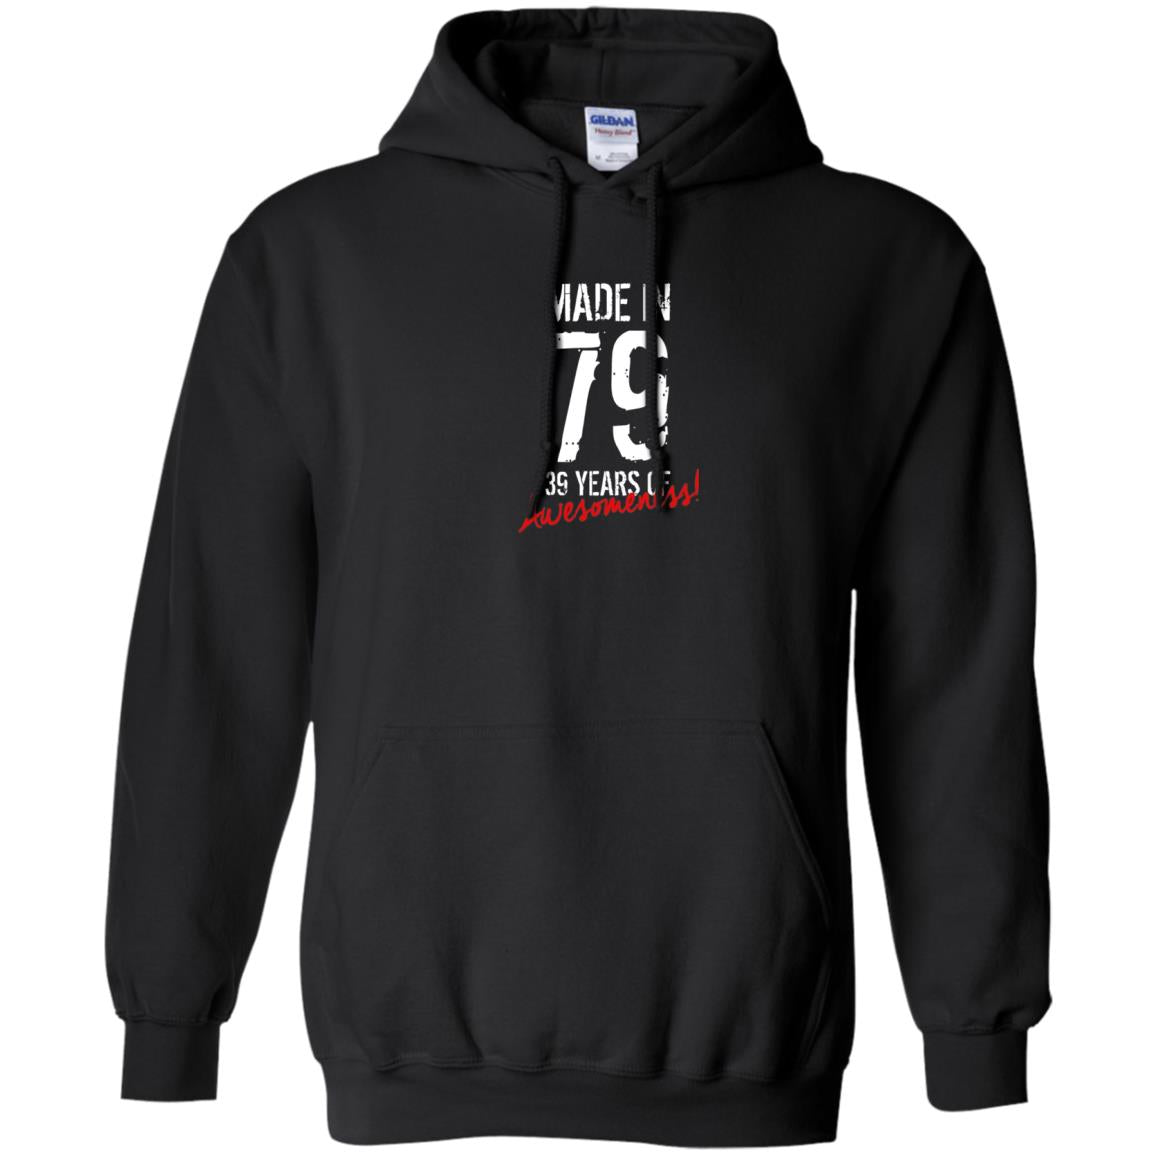 Made In 79 39 Years Of Awesomeness 39th Birthday T-shirt